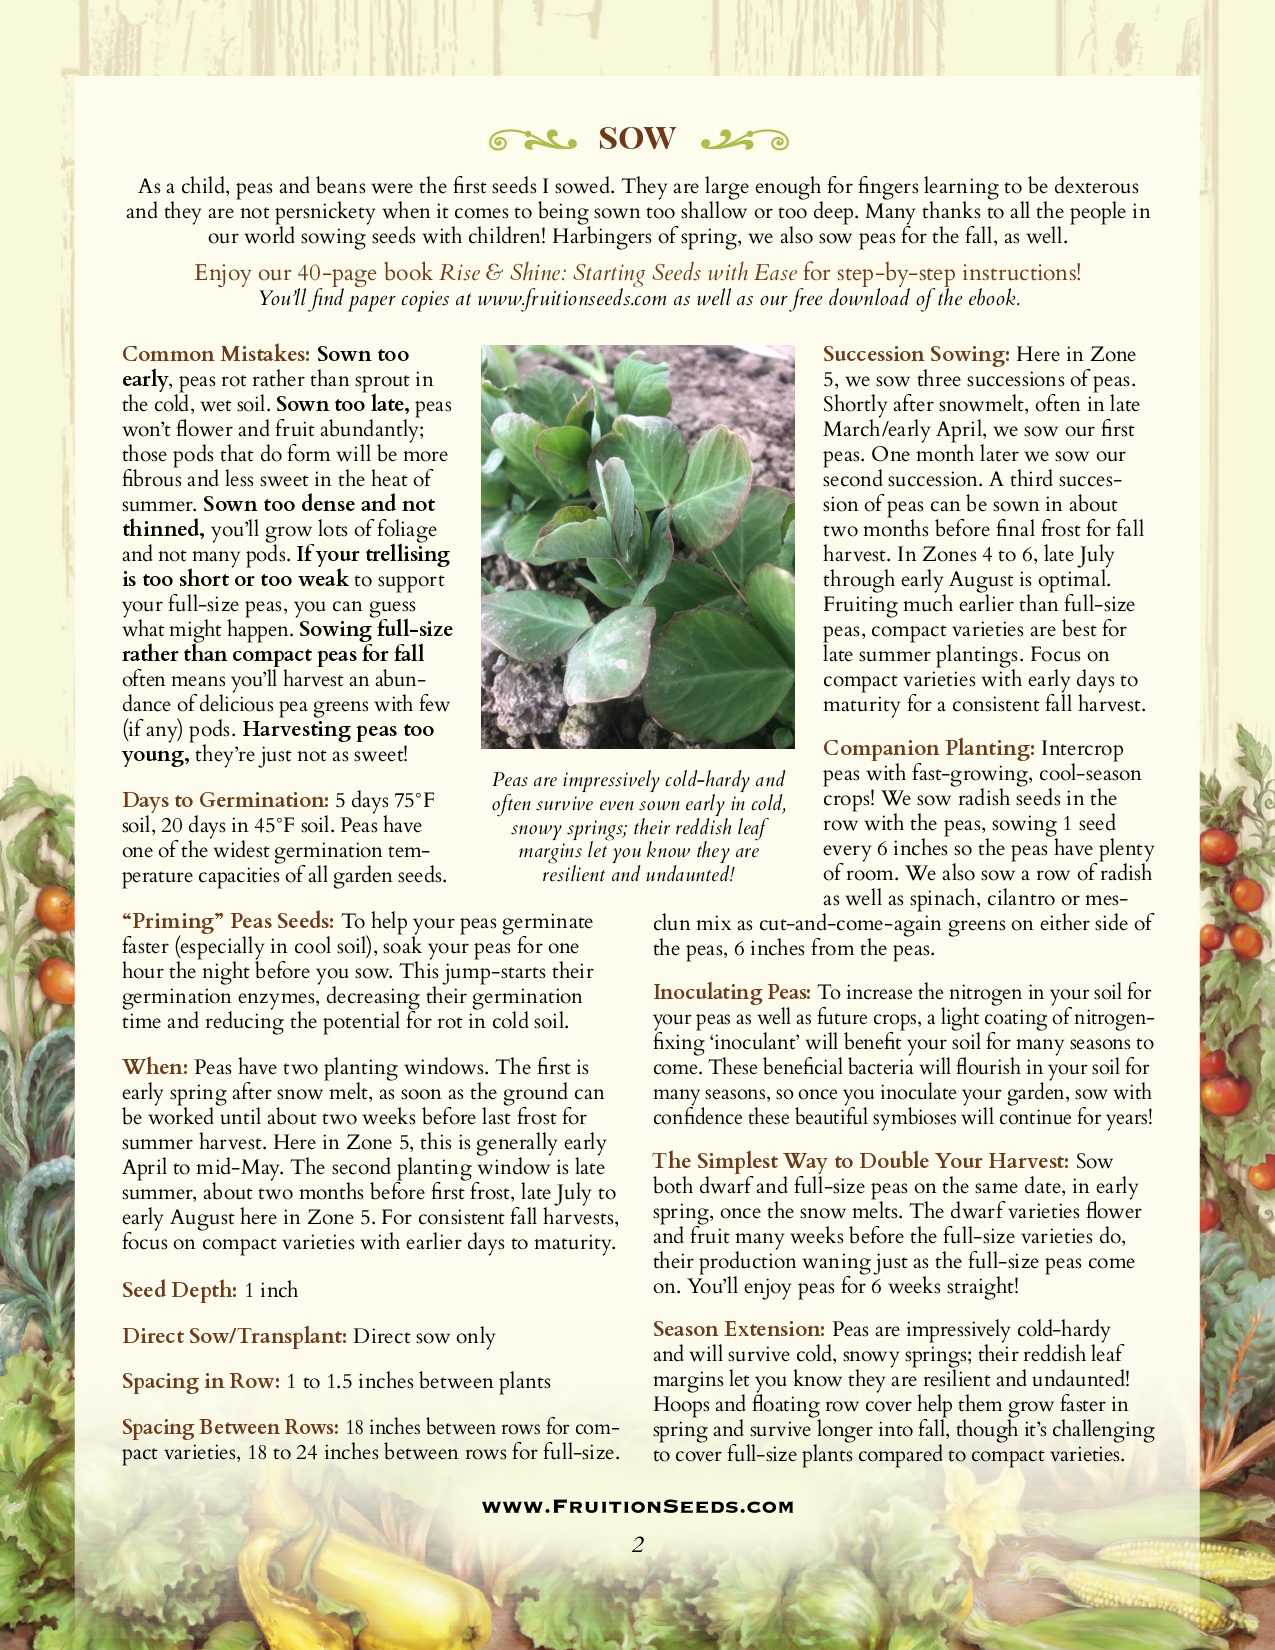 Growing Guide for Sowing & Growing Series: Peas